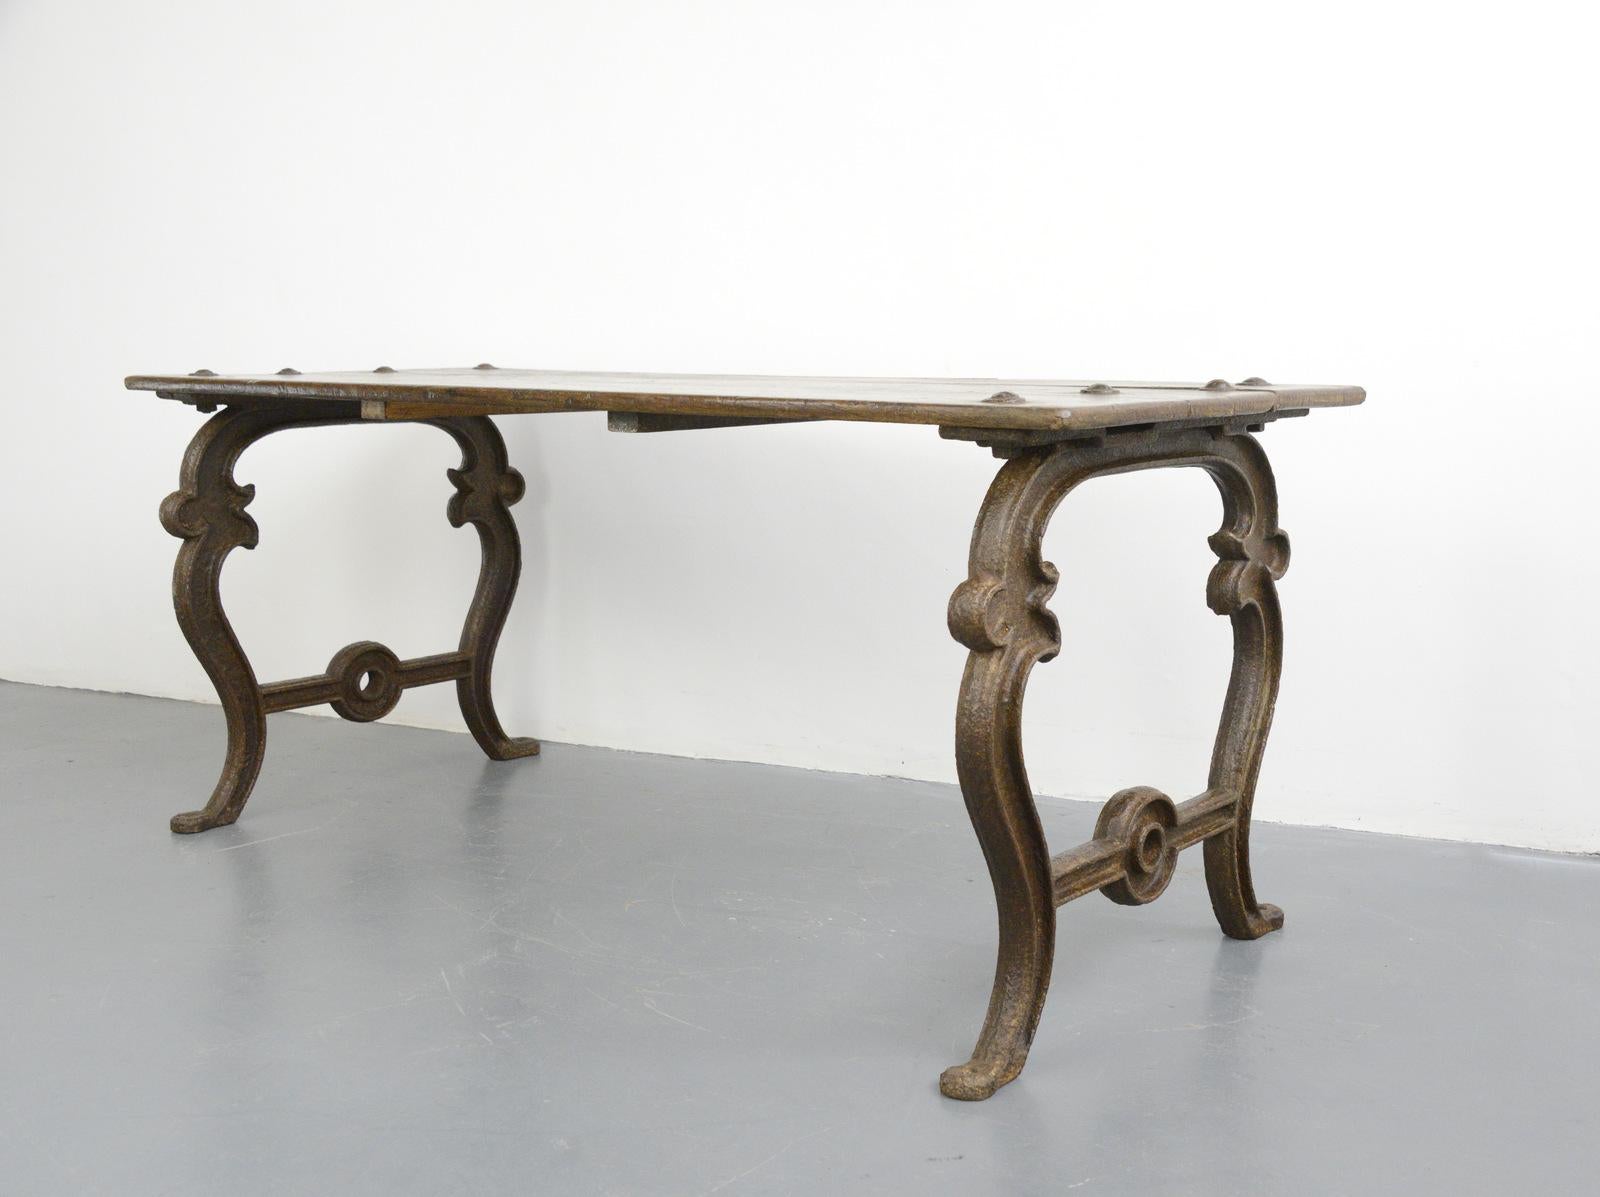 French Colonial North African work table, circa 1800

- Ornate cast iron base
- Solid 3 plank oak top
- Blacksmith made bolts
- Originally came from a workshop in Algeria and its last home was in Egypt before coming back over to France
-